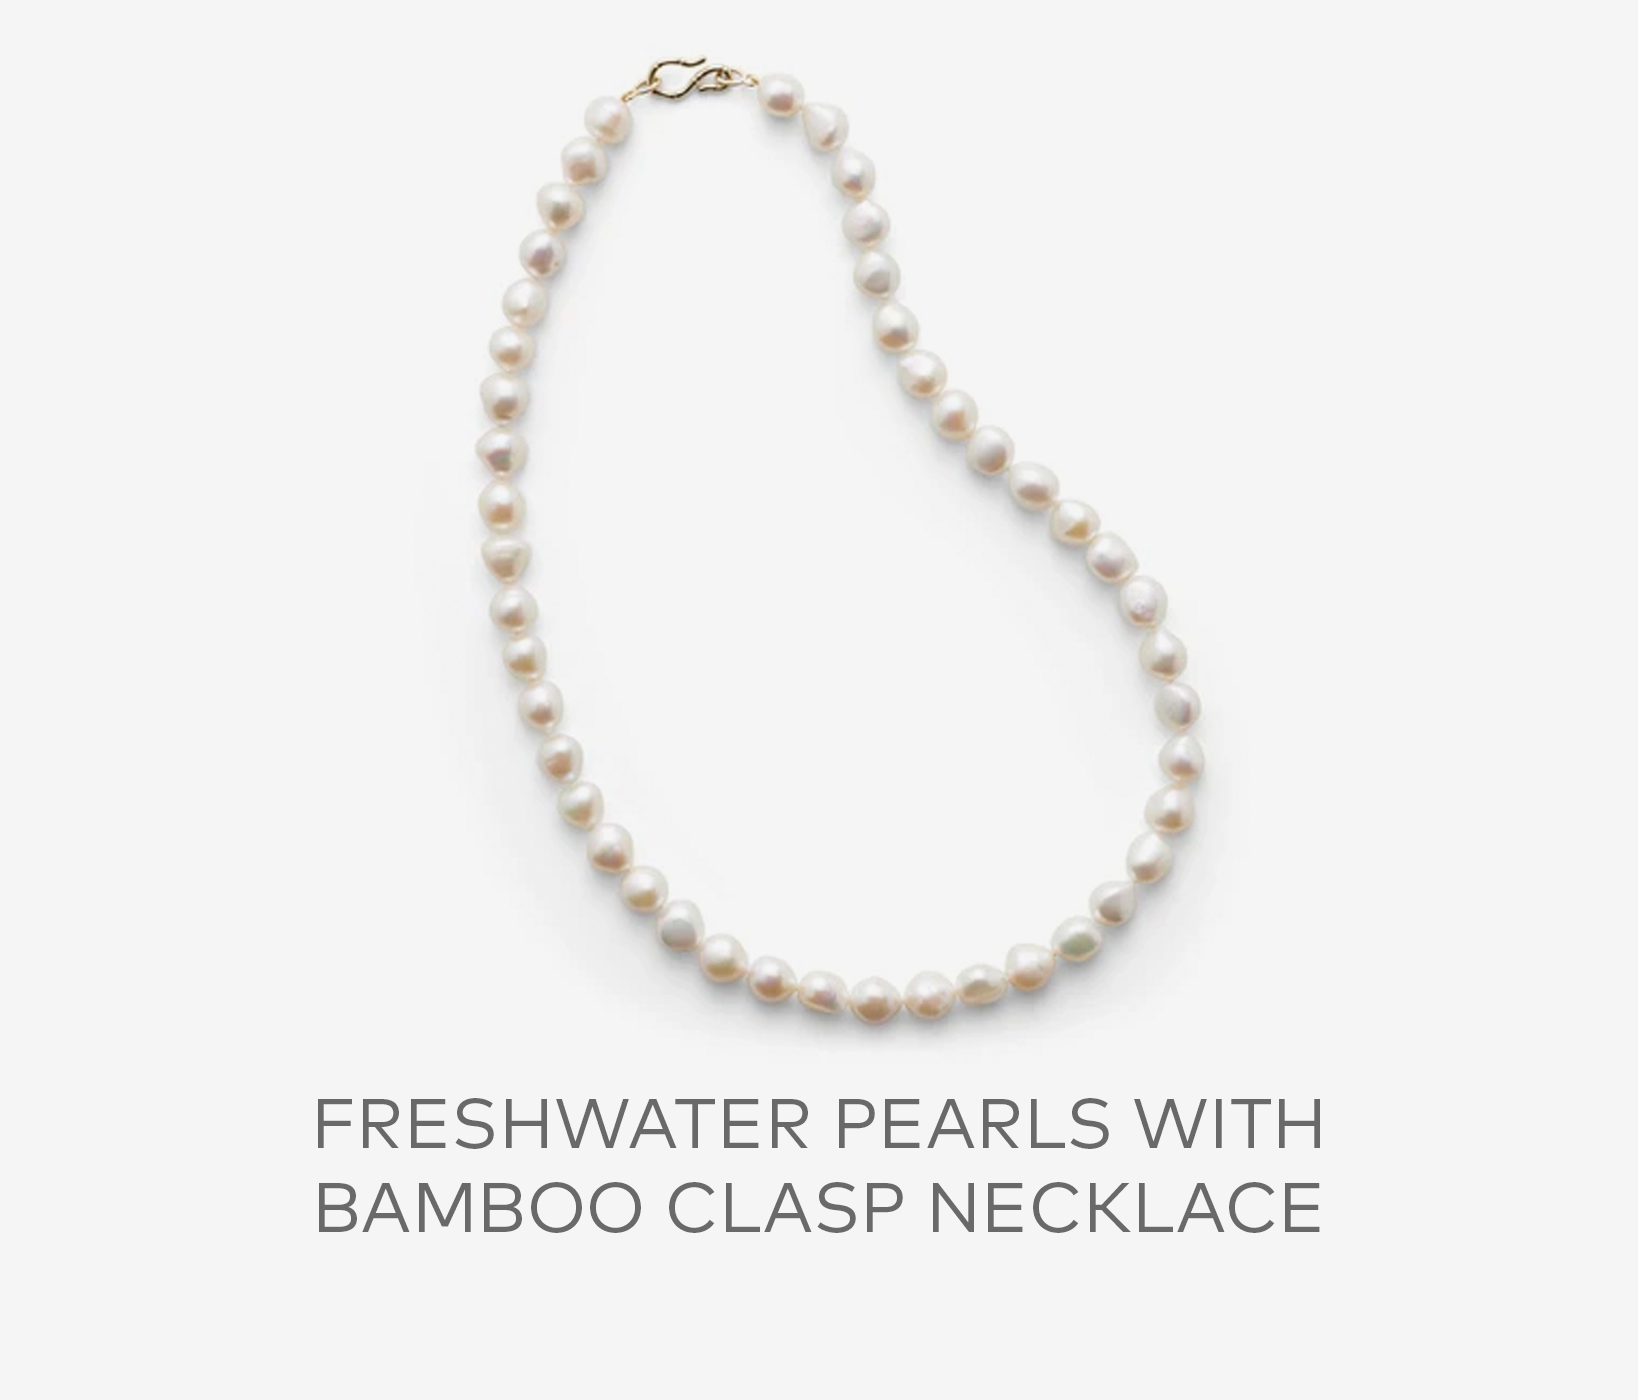 Freshwater Pearls with Bamboo Clasp Necklace